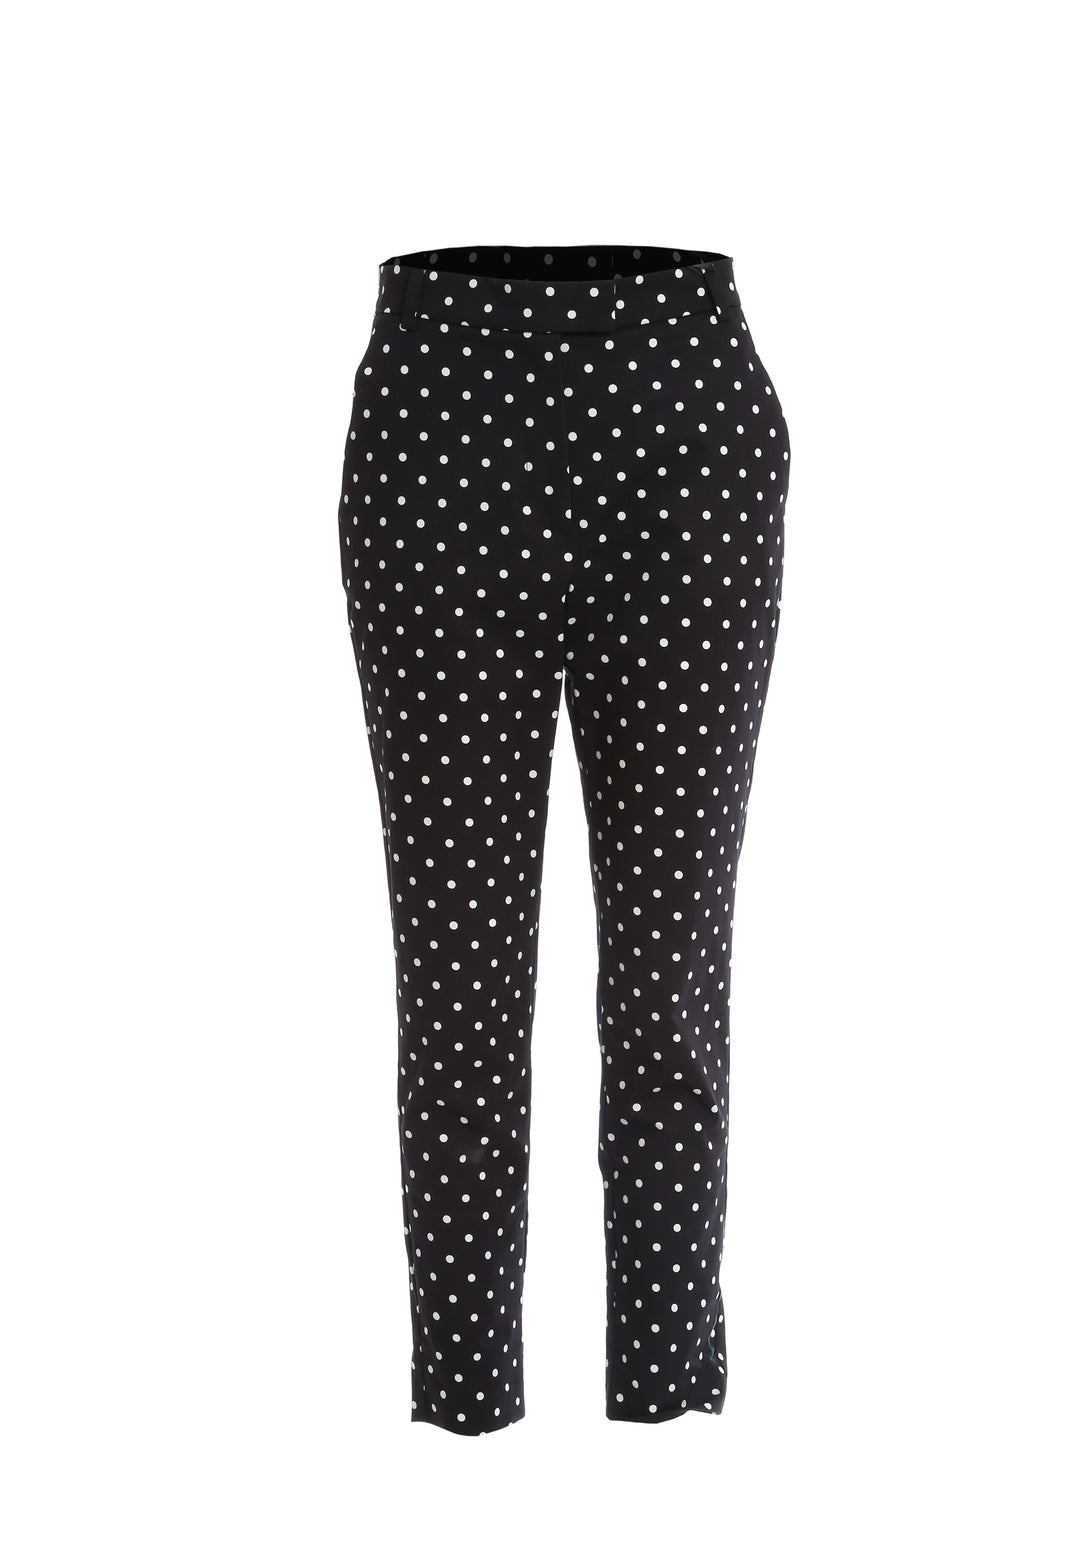 Pant slim fit with polka dots pattern